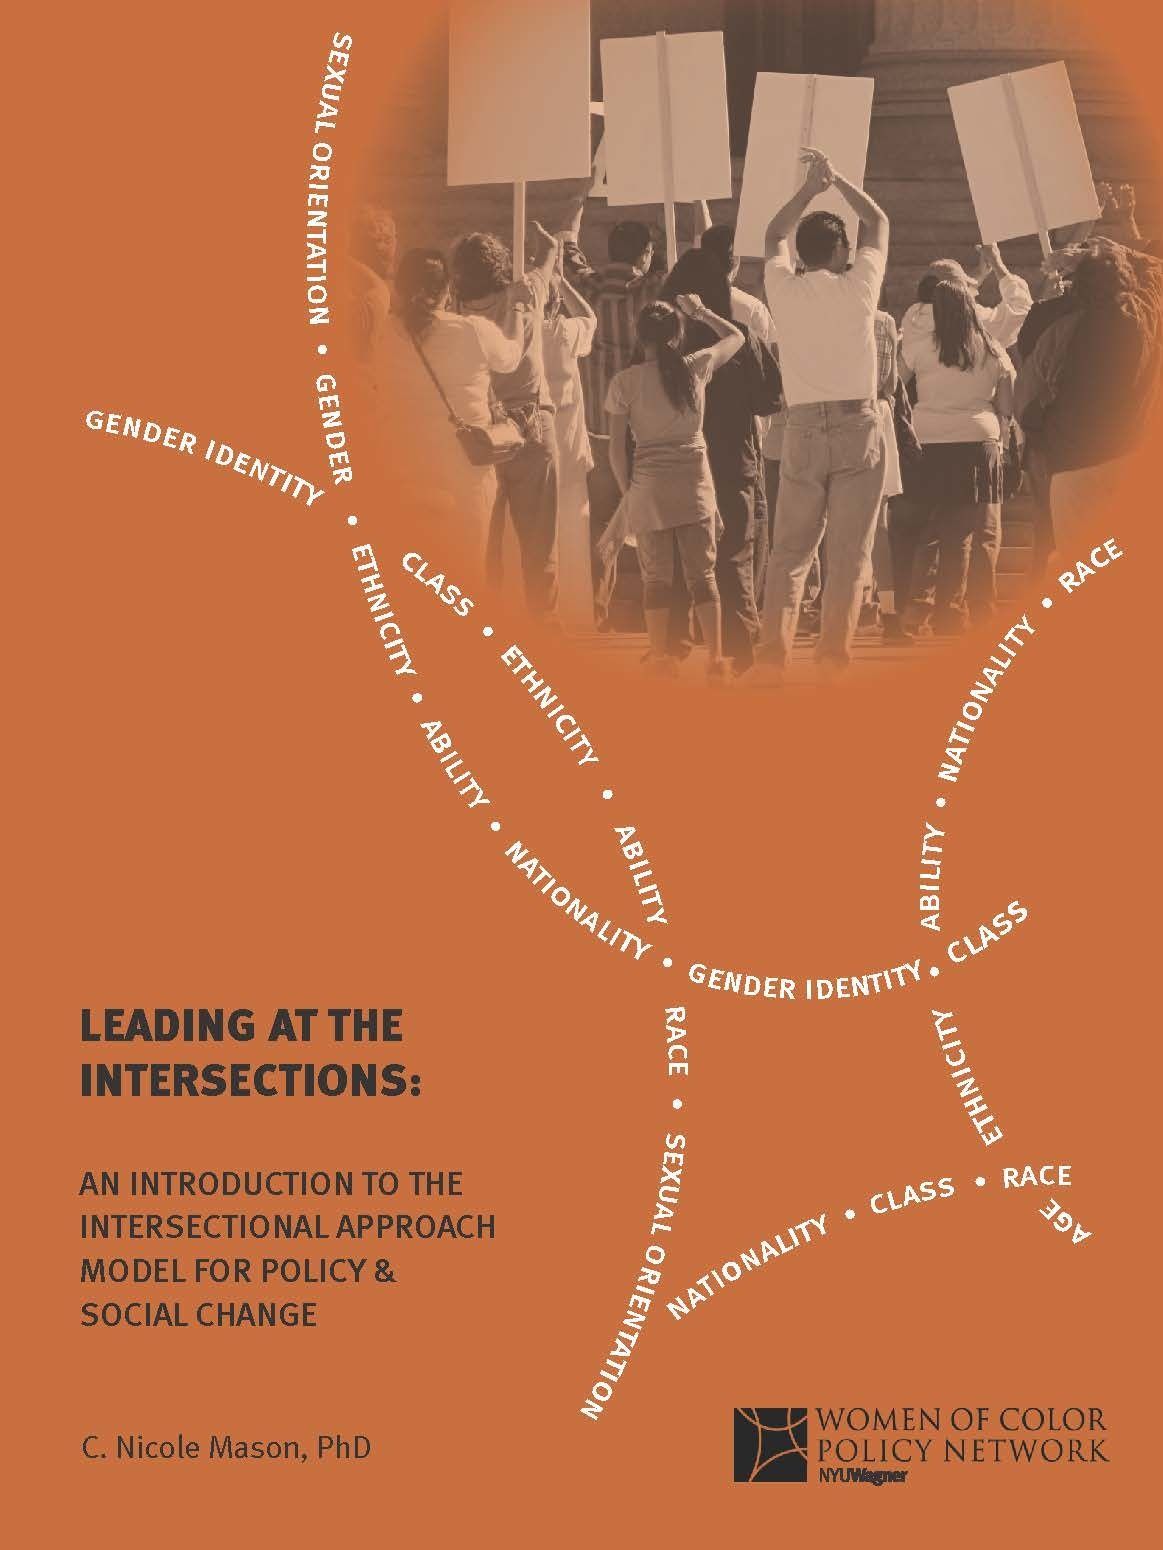 Leading at the Intersections: An Introduction to the Intersectional Approach Model for Policy & Social Change